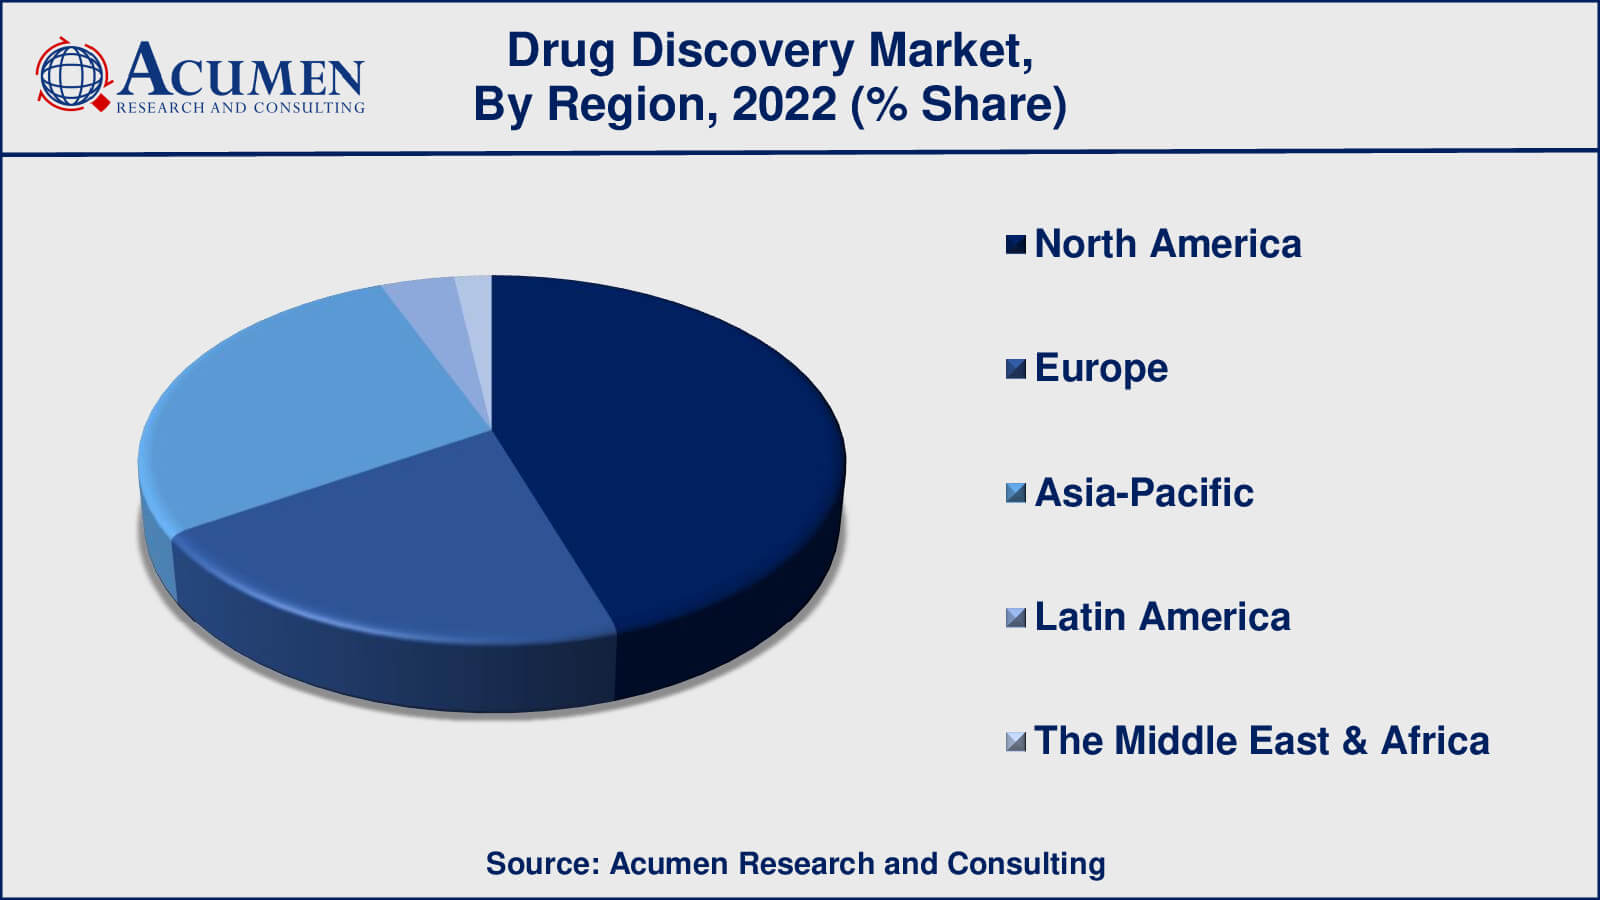 Drug Discovery Market Drivers